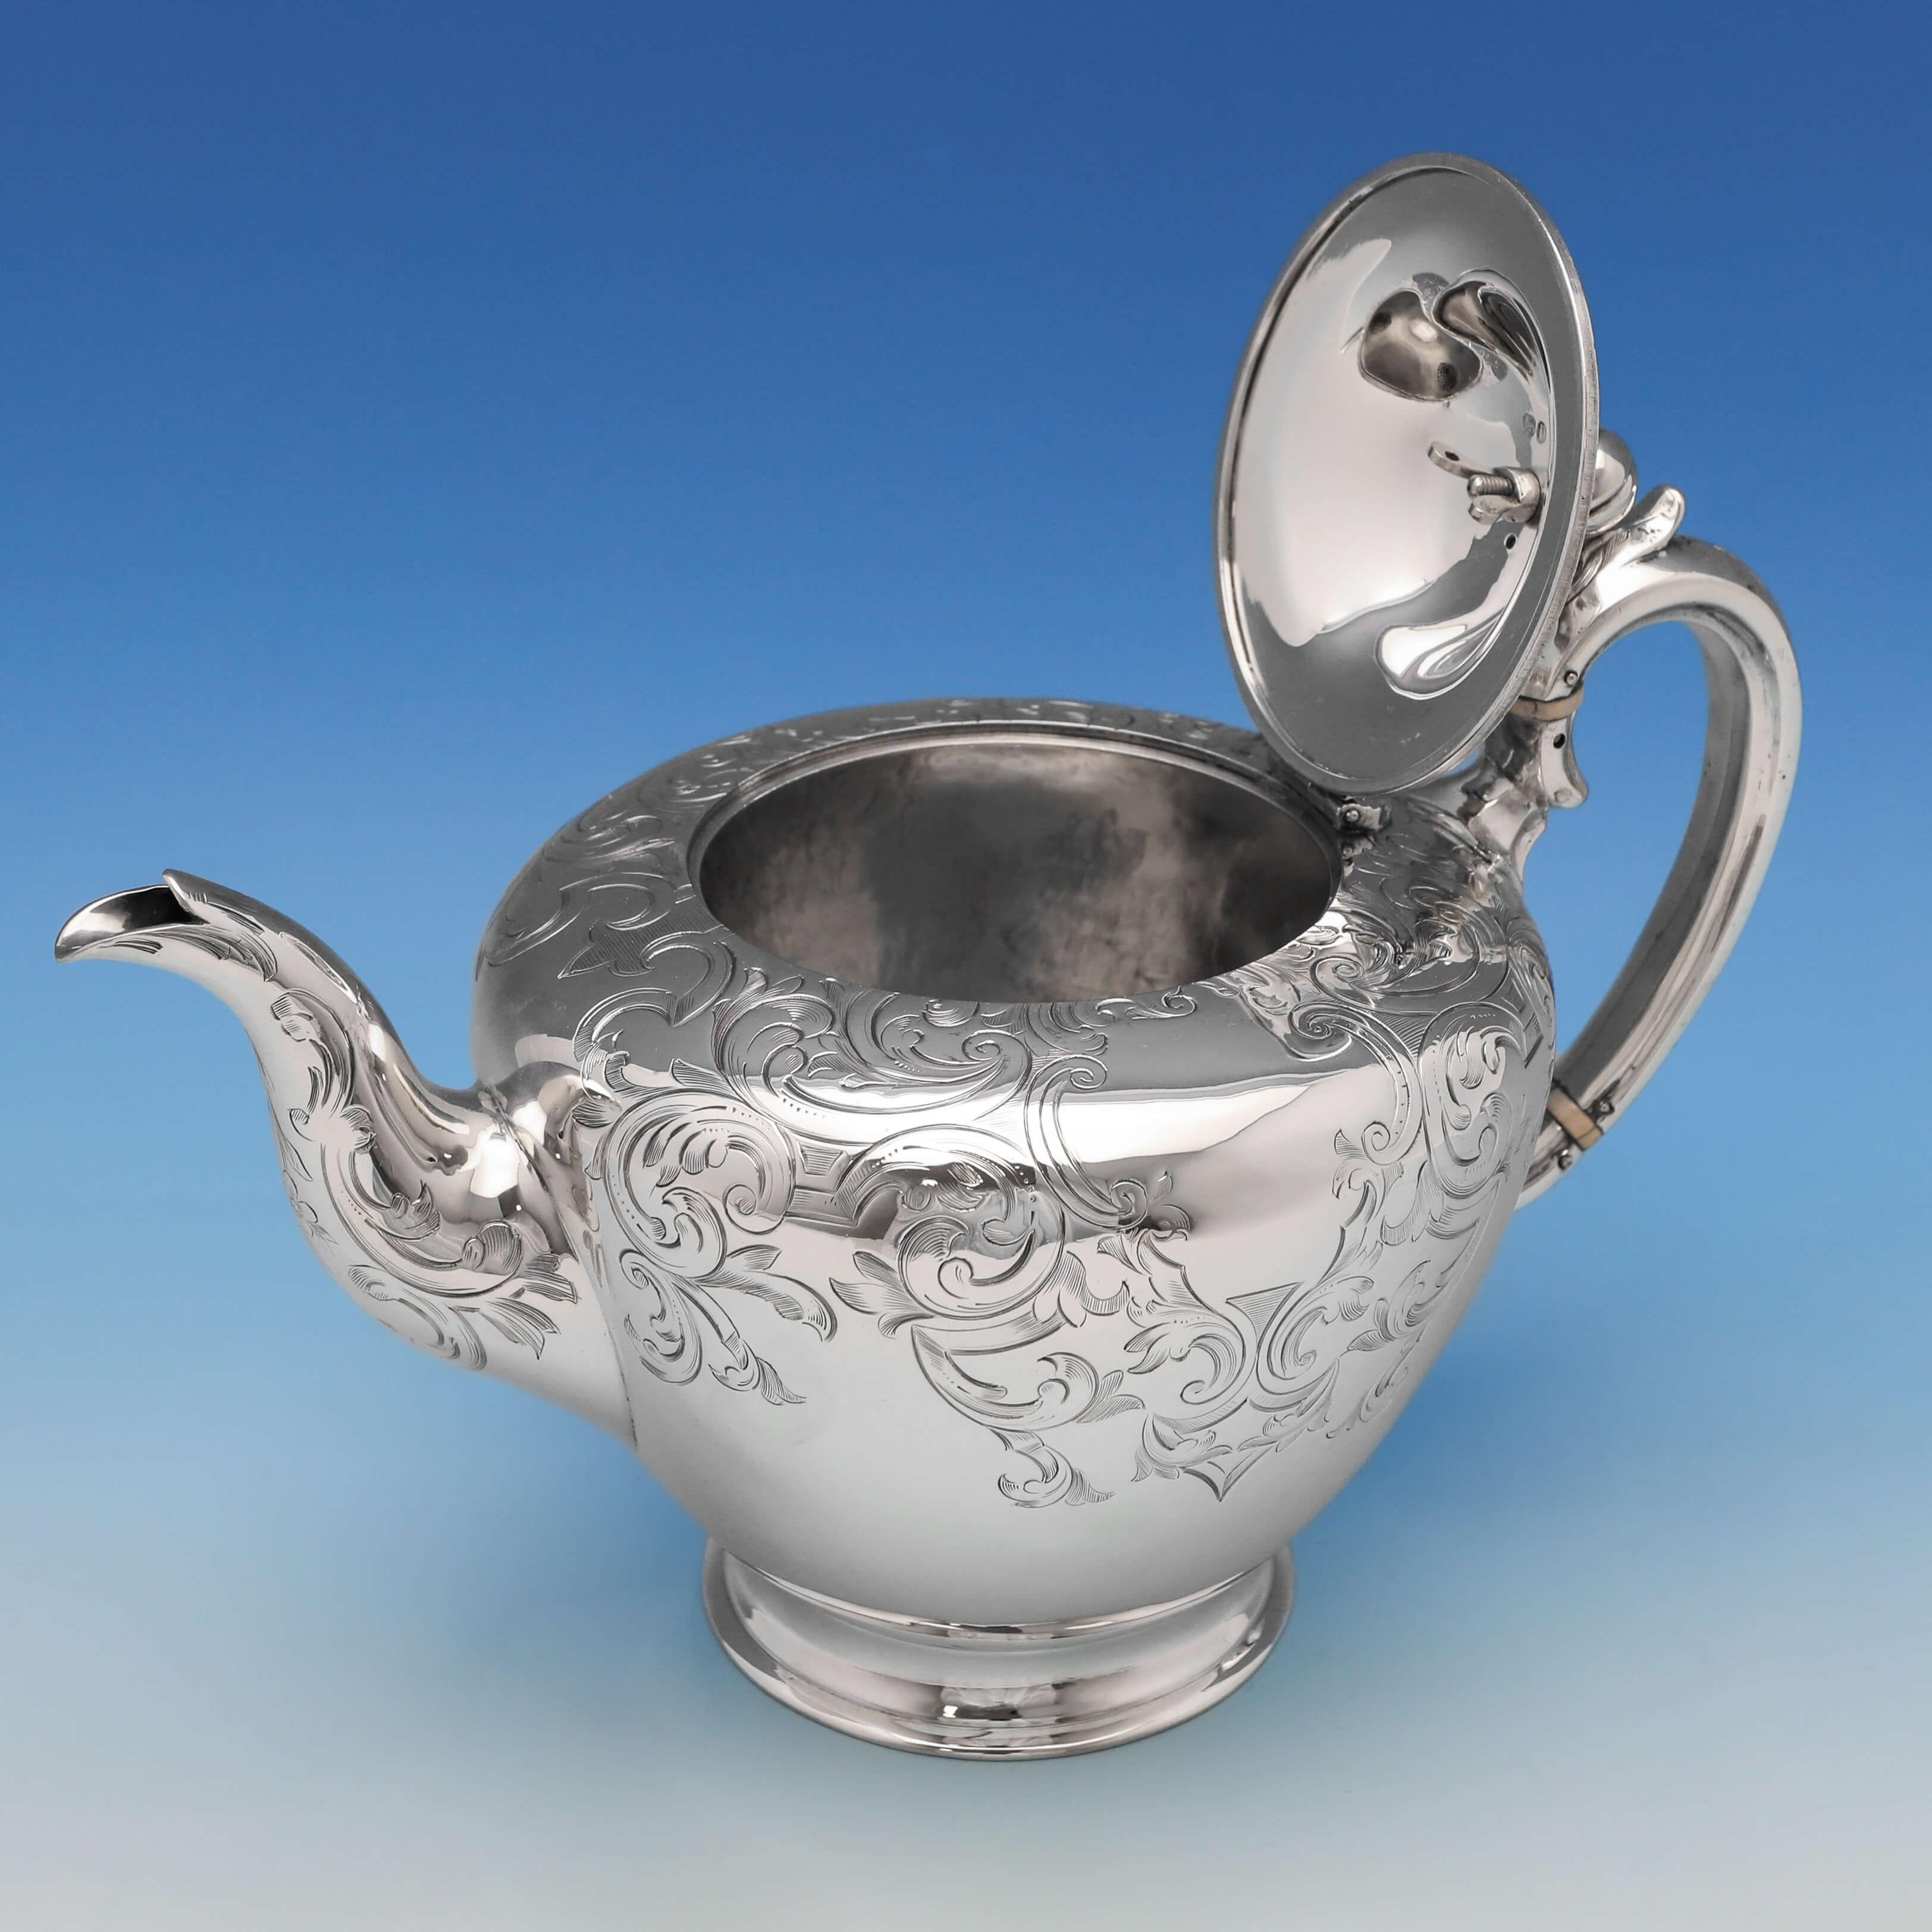 Hallmarked in London in 1850 by George Burrows II & Richard Pearce, this attractive, Victorian, antique sterling silver teapot, features engraved decoration throughout, a pumpkin shaped finial, and a silver handle with ivory breakers. The teapot